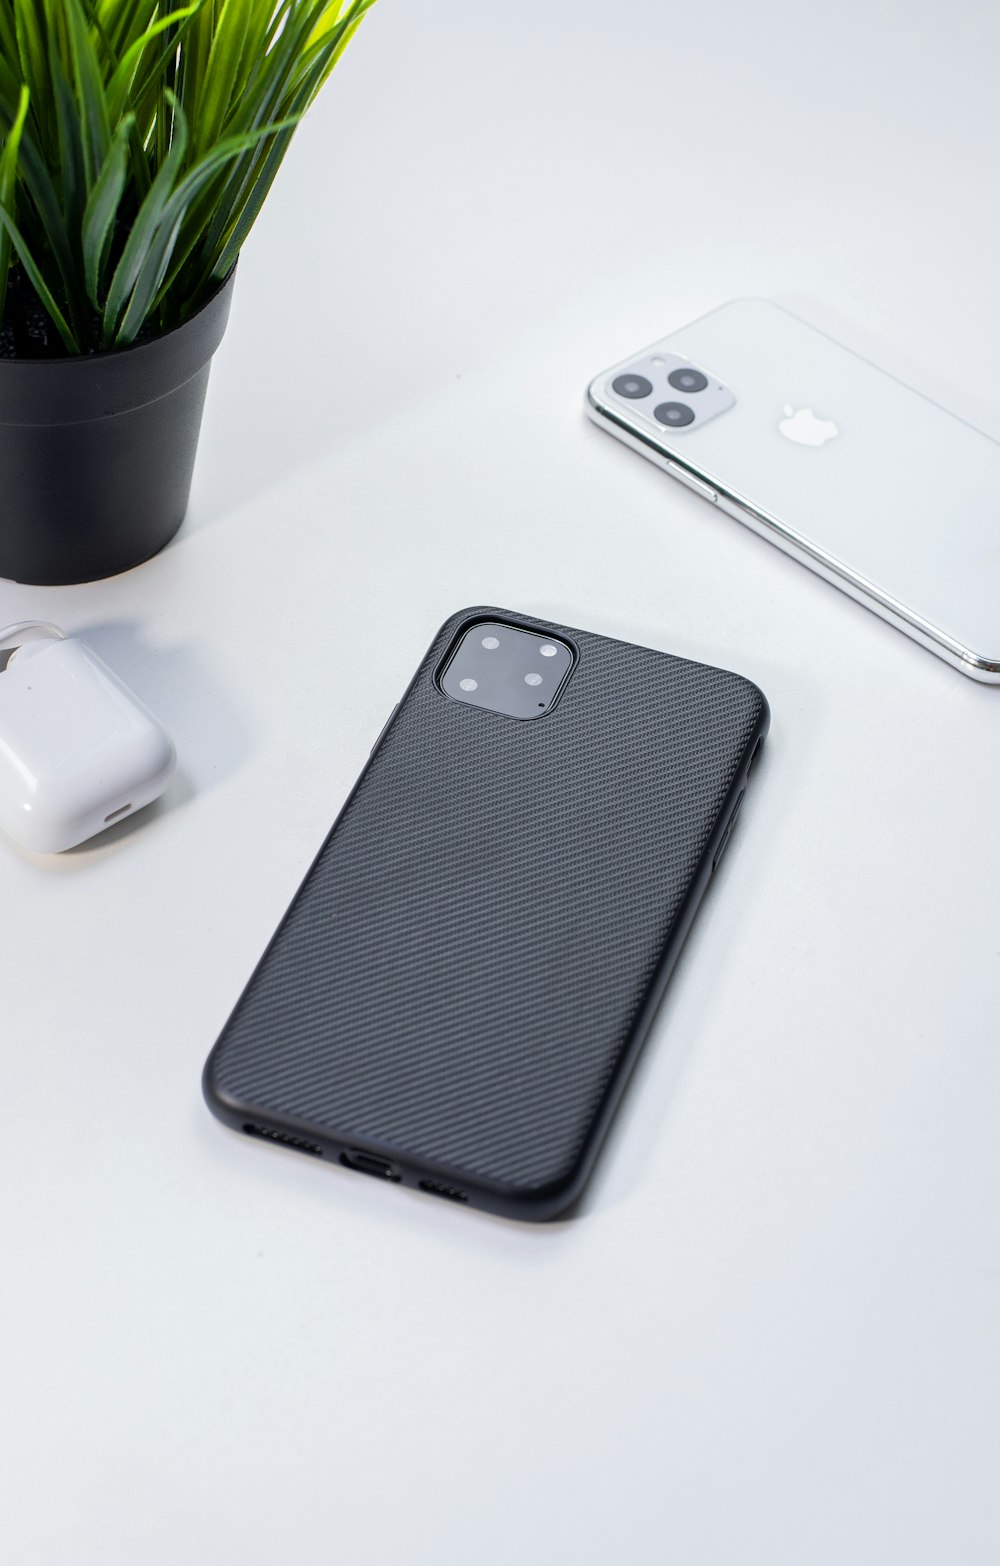 silver iPhone X Pro with case